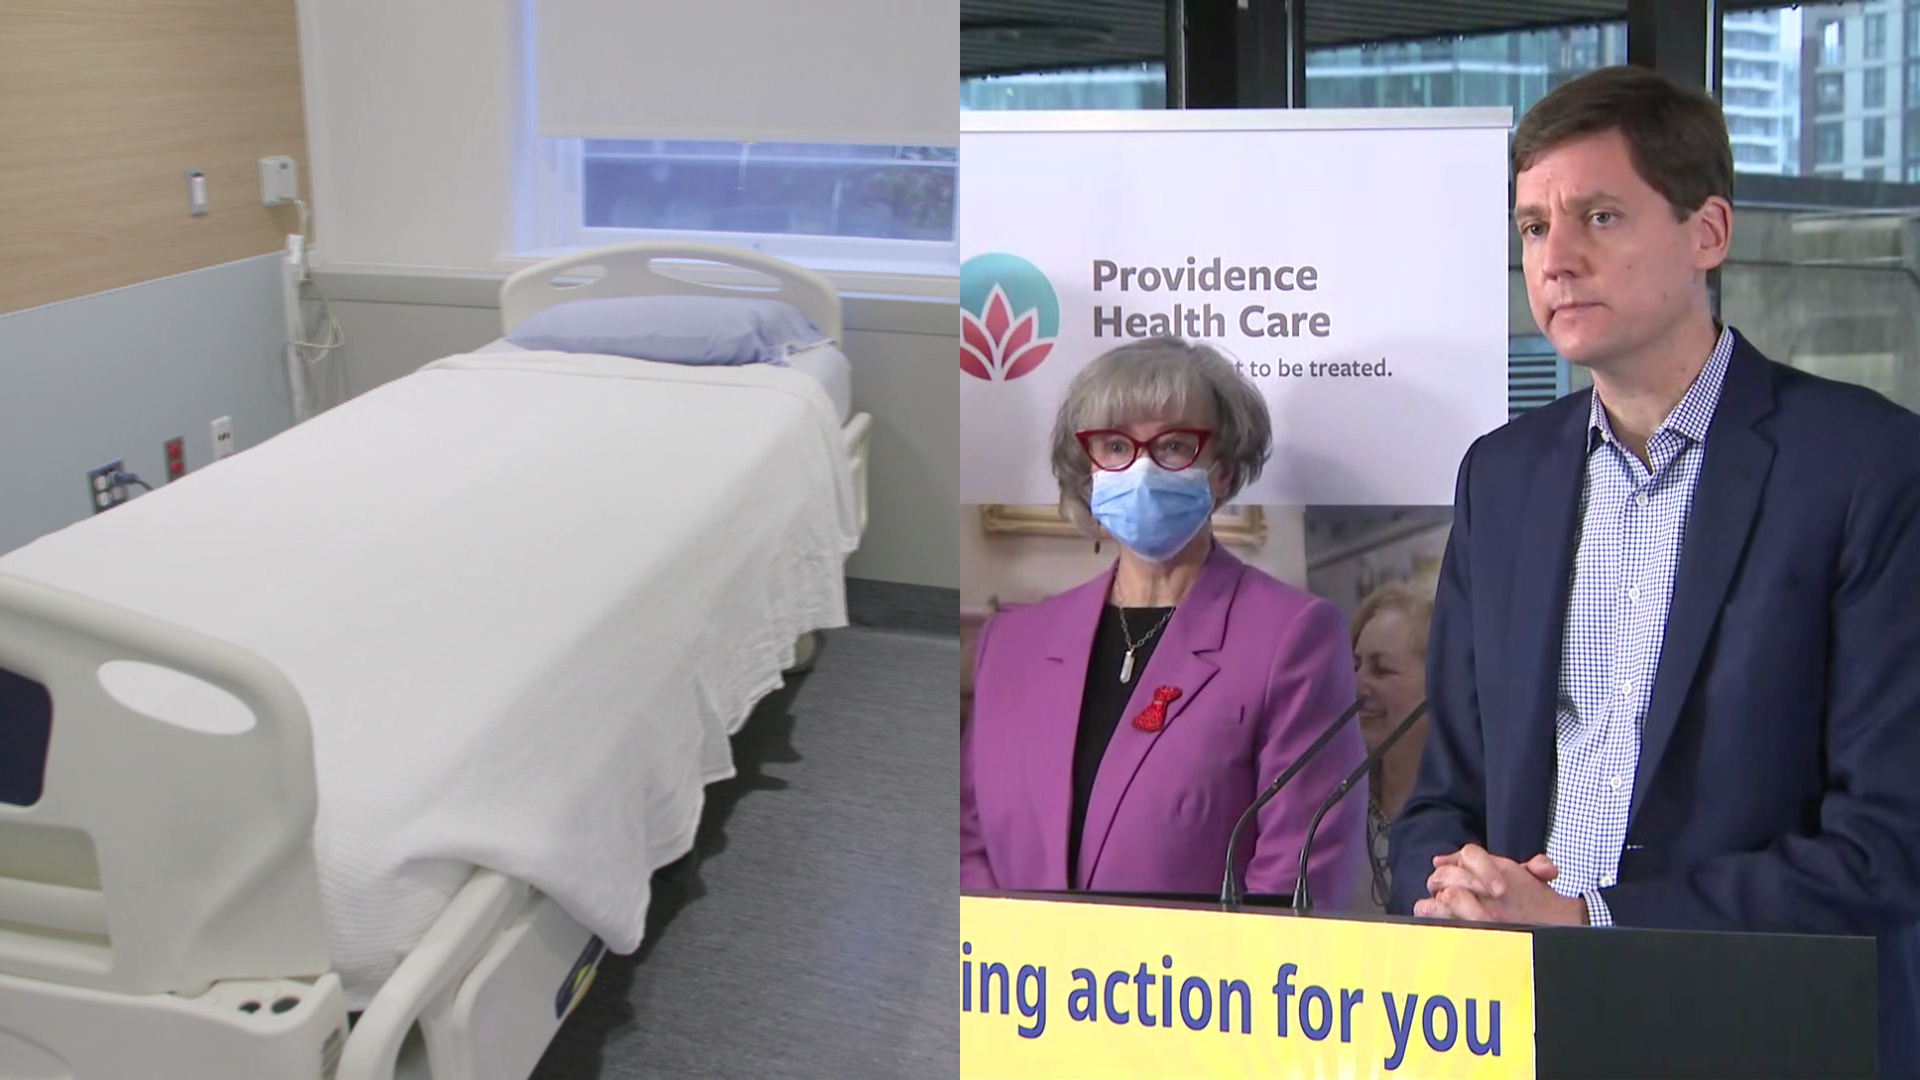 Falls prevention is for everybody” says BC Cancer Agency president